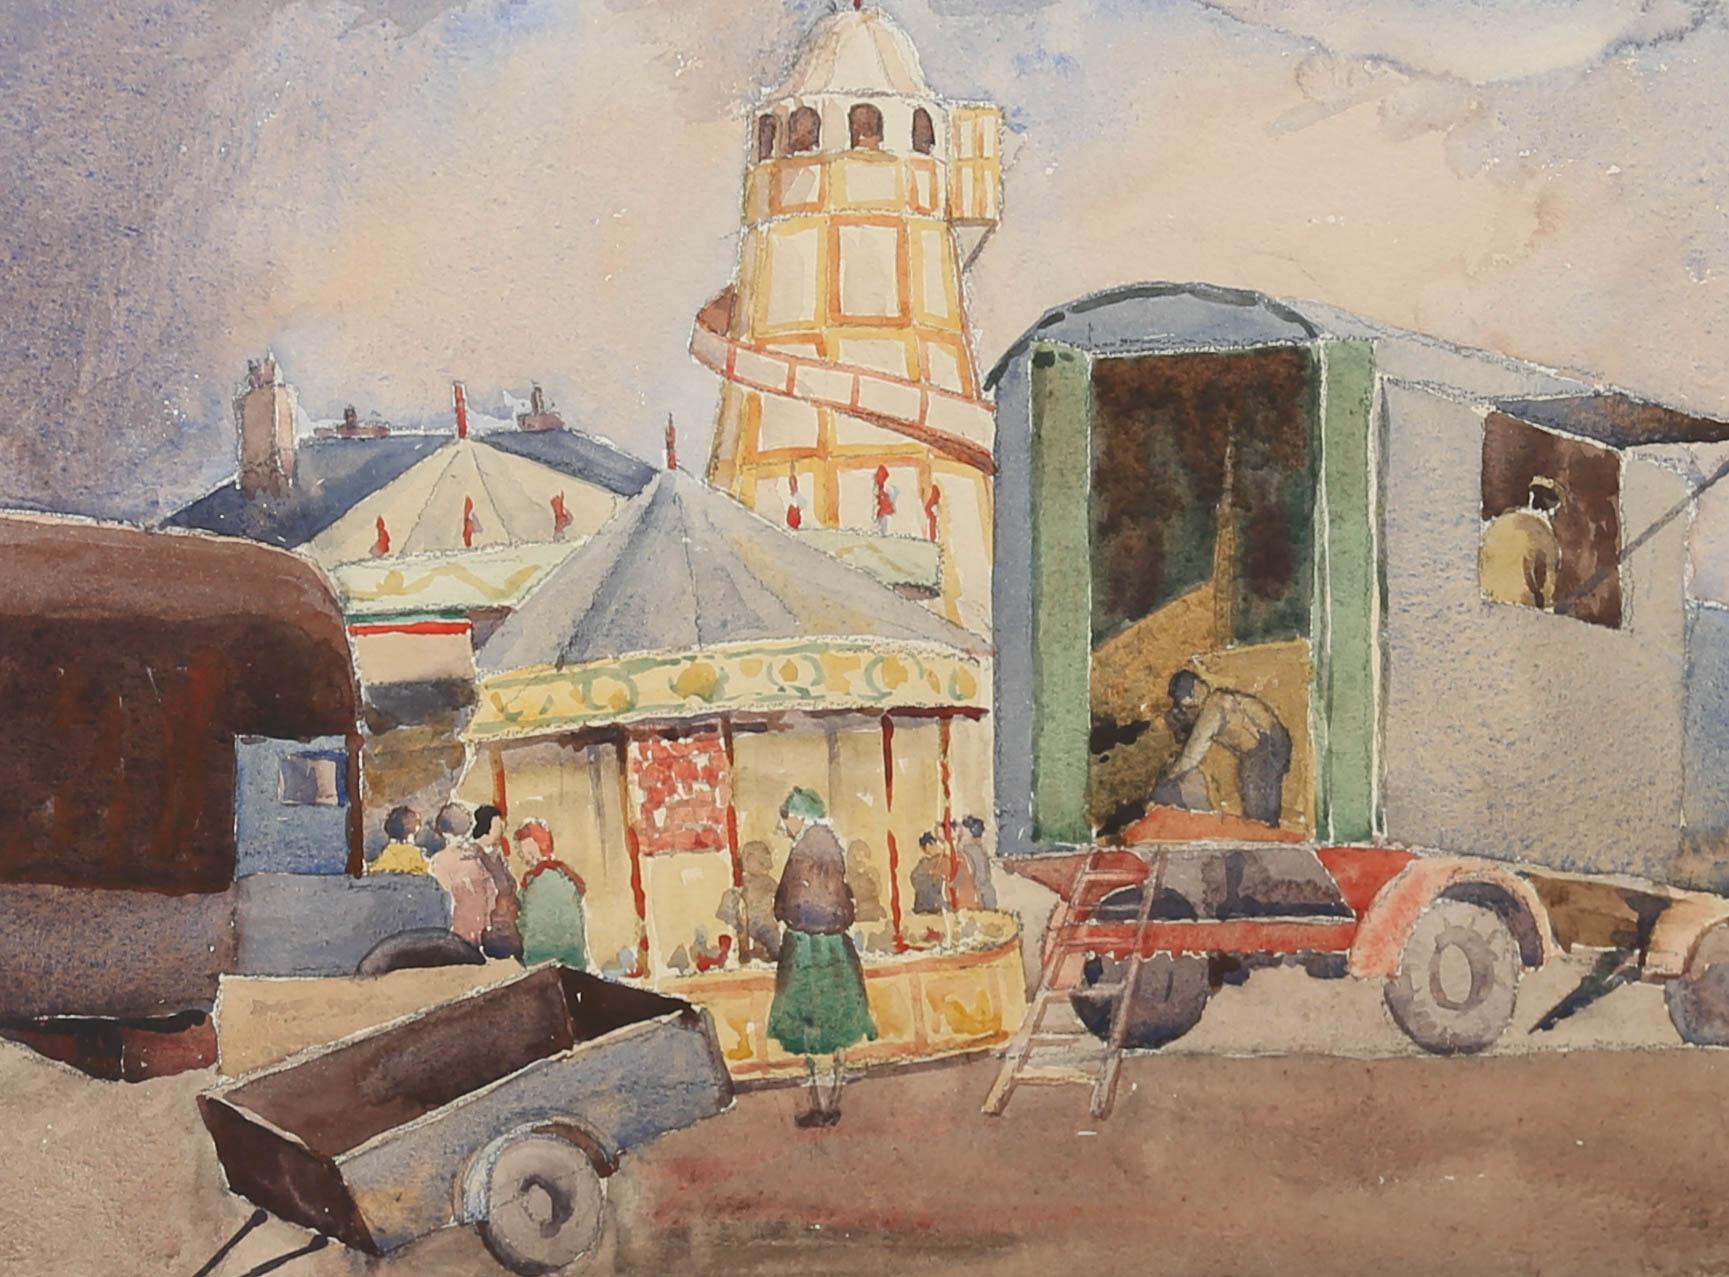 A delightful live painting of Pinner Fair in 1935. The artist has captured the trailers and helter skelter in colourful details. Unsigned. Presented in a glazed gilt frame. On watercolour paper.